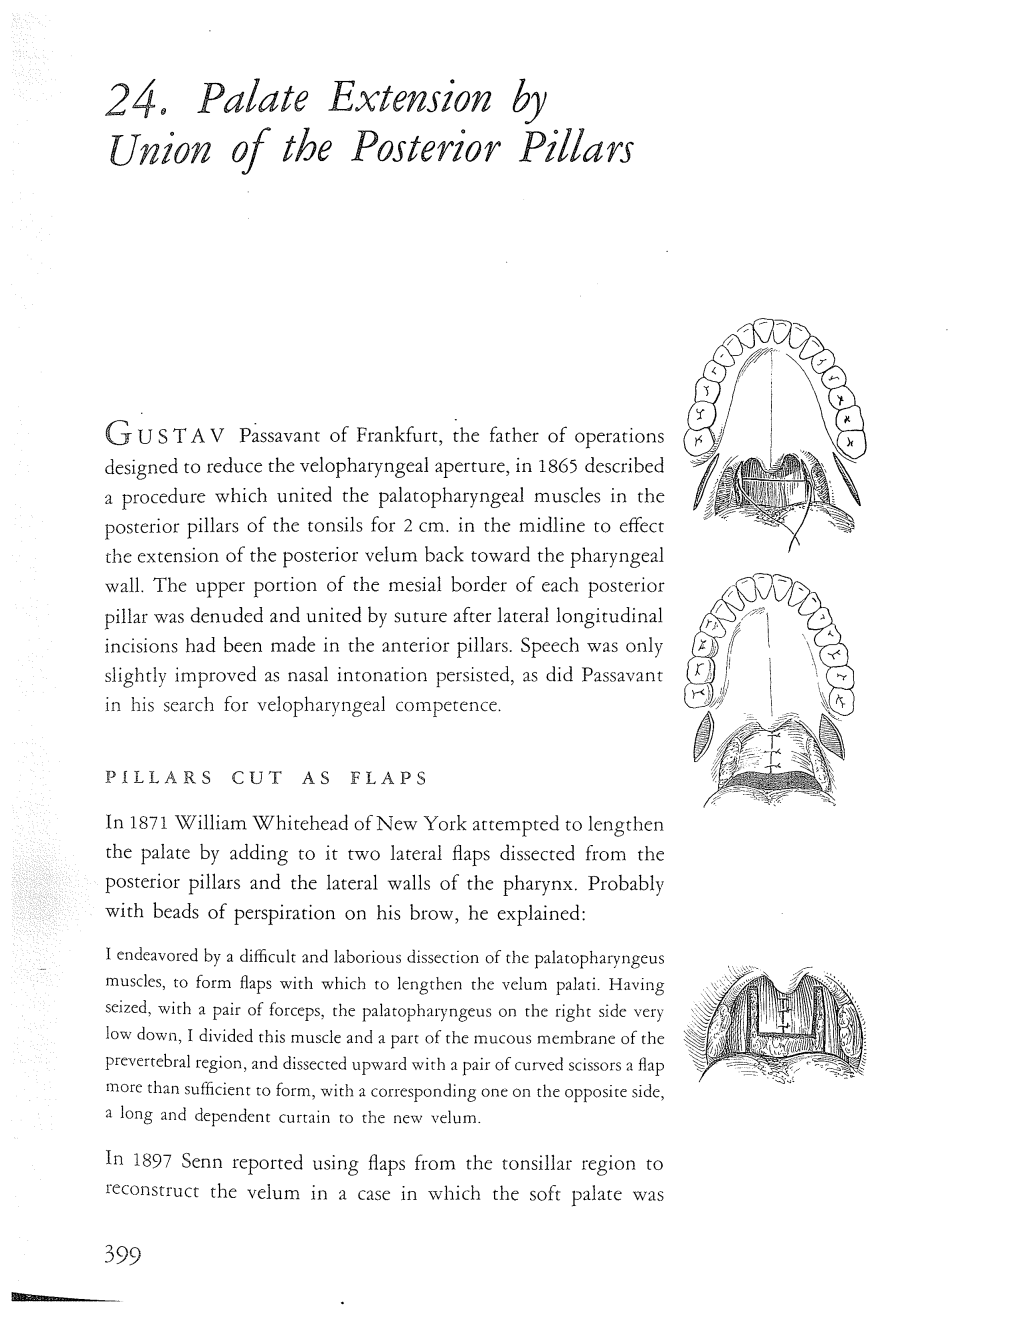 24. Palate Extension by Union of the Posterior Pillars